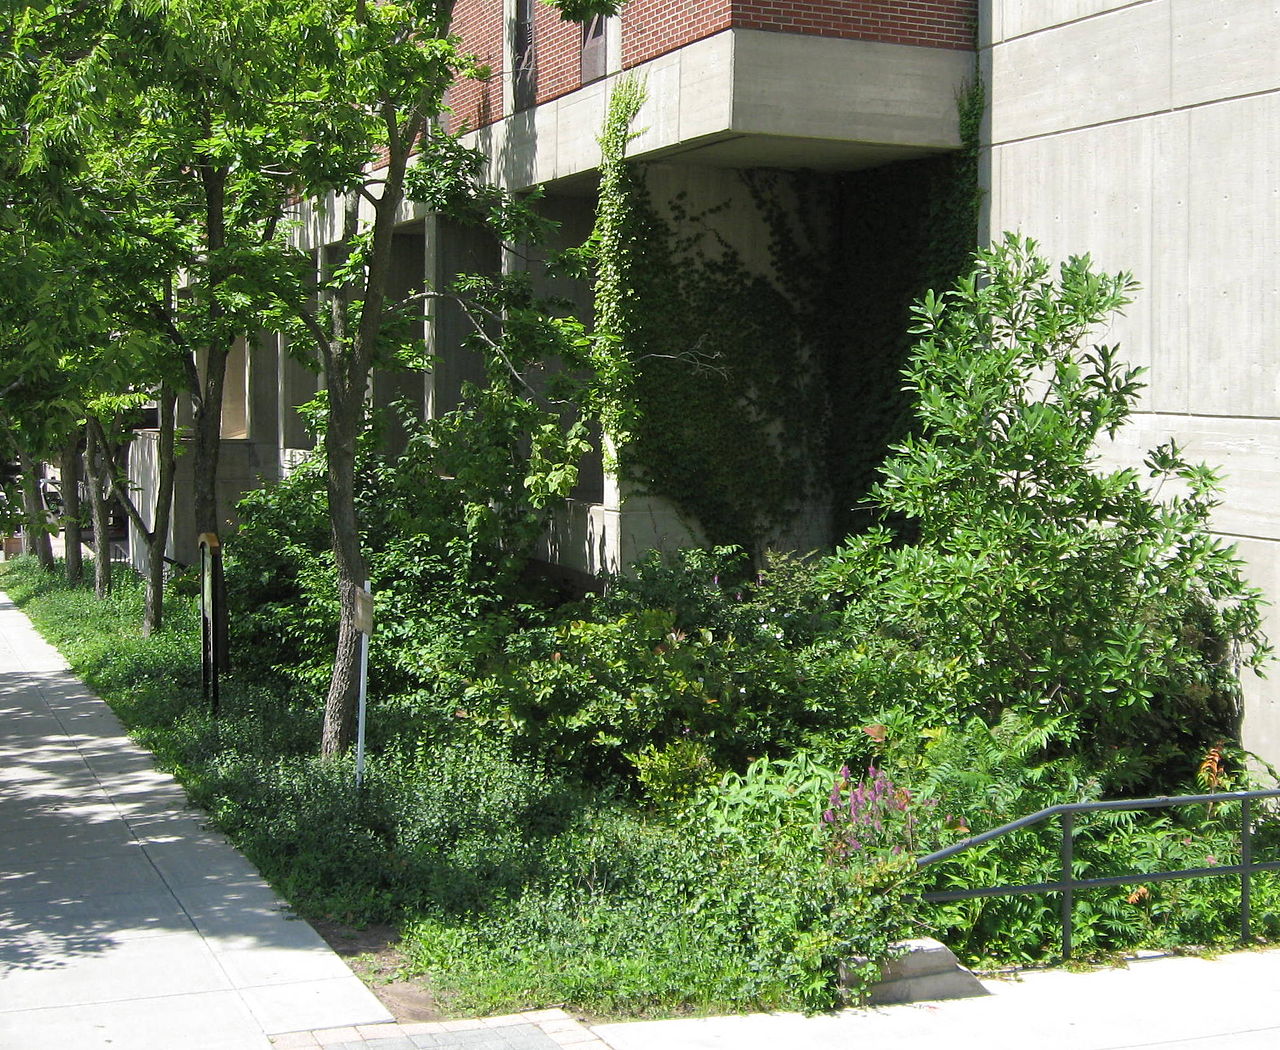 Rain garden, SUNY College of Environmental Science and Forestry, Syracuse, New York